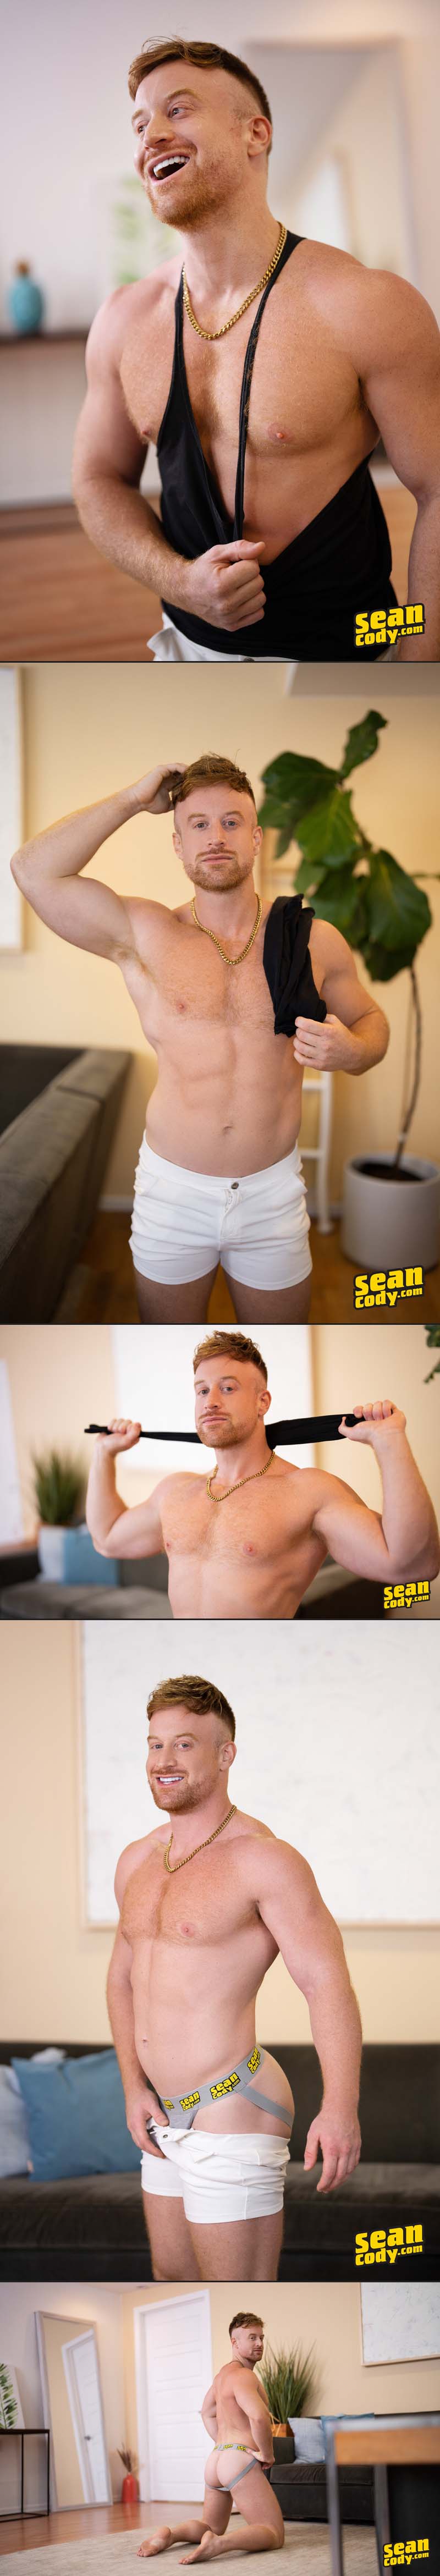 Tim James' Introductory Solo at SeanCody